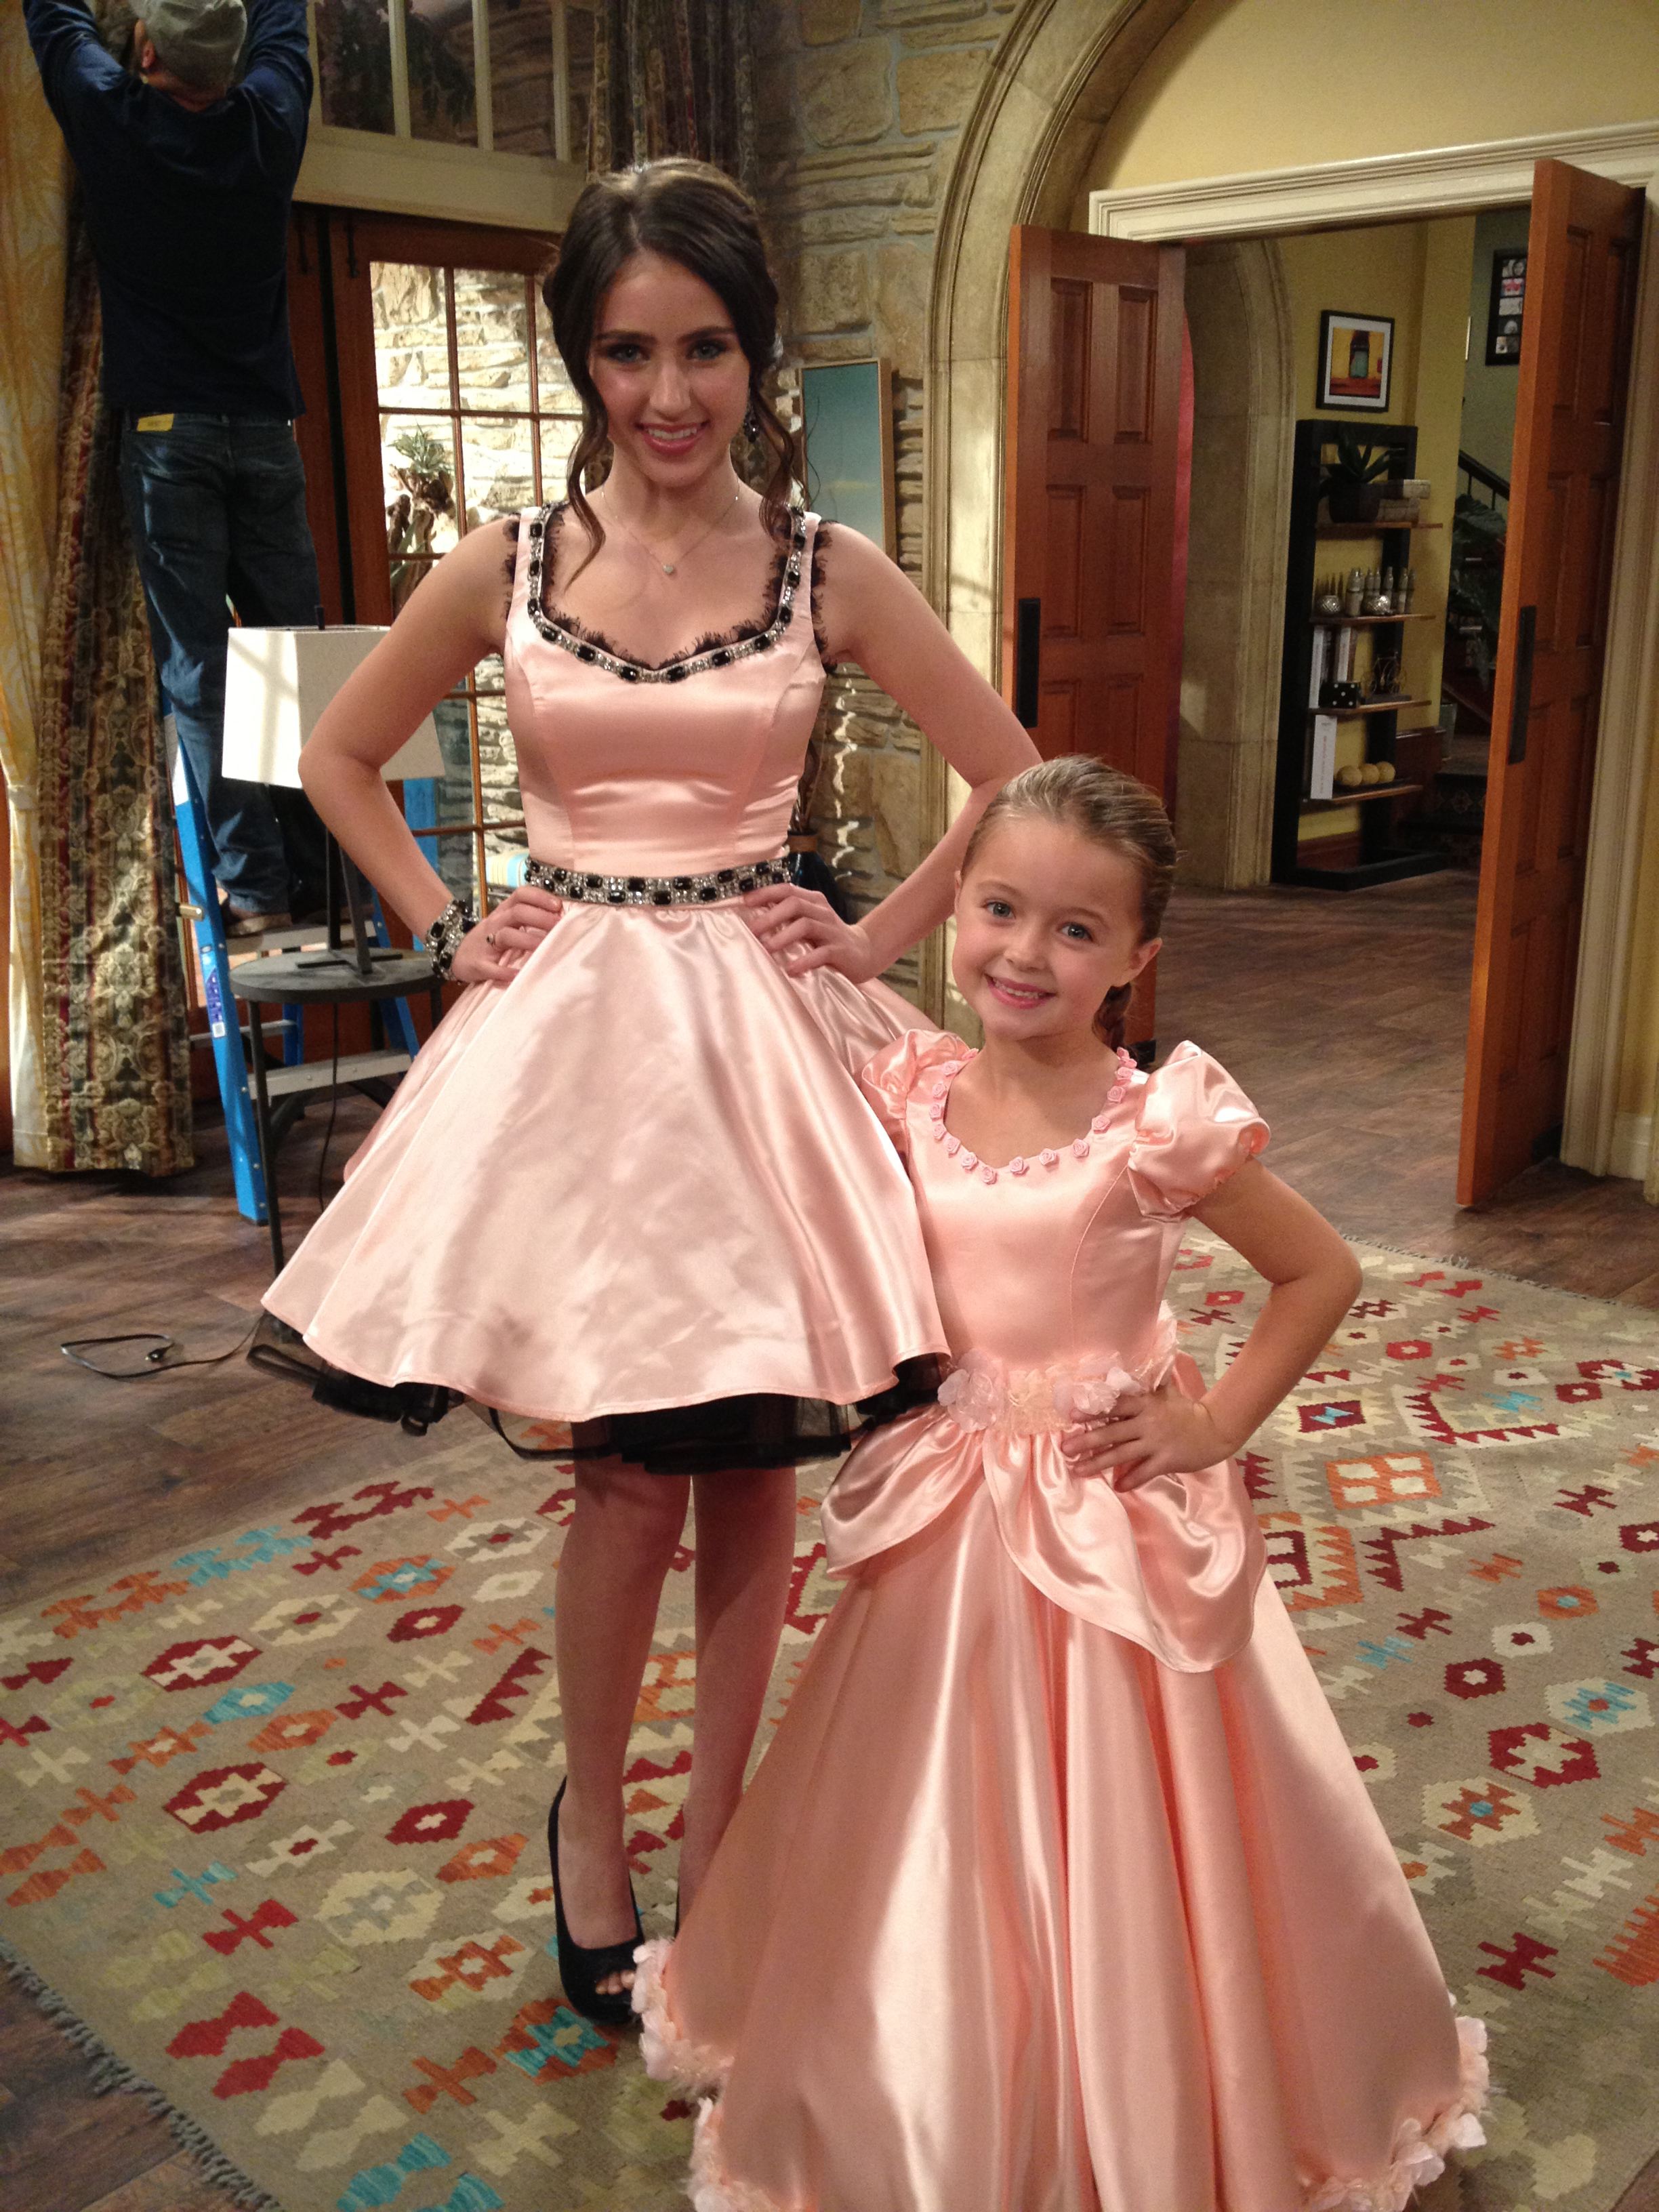 Rylan Lee and Ryan Newman on the set of See Dad Run